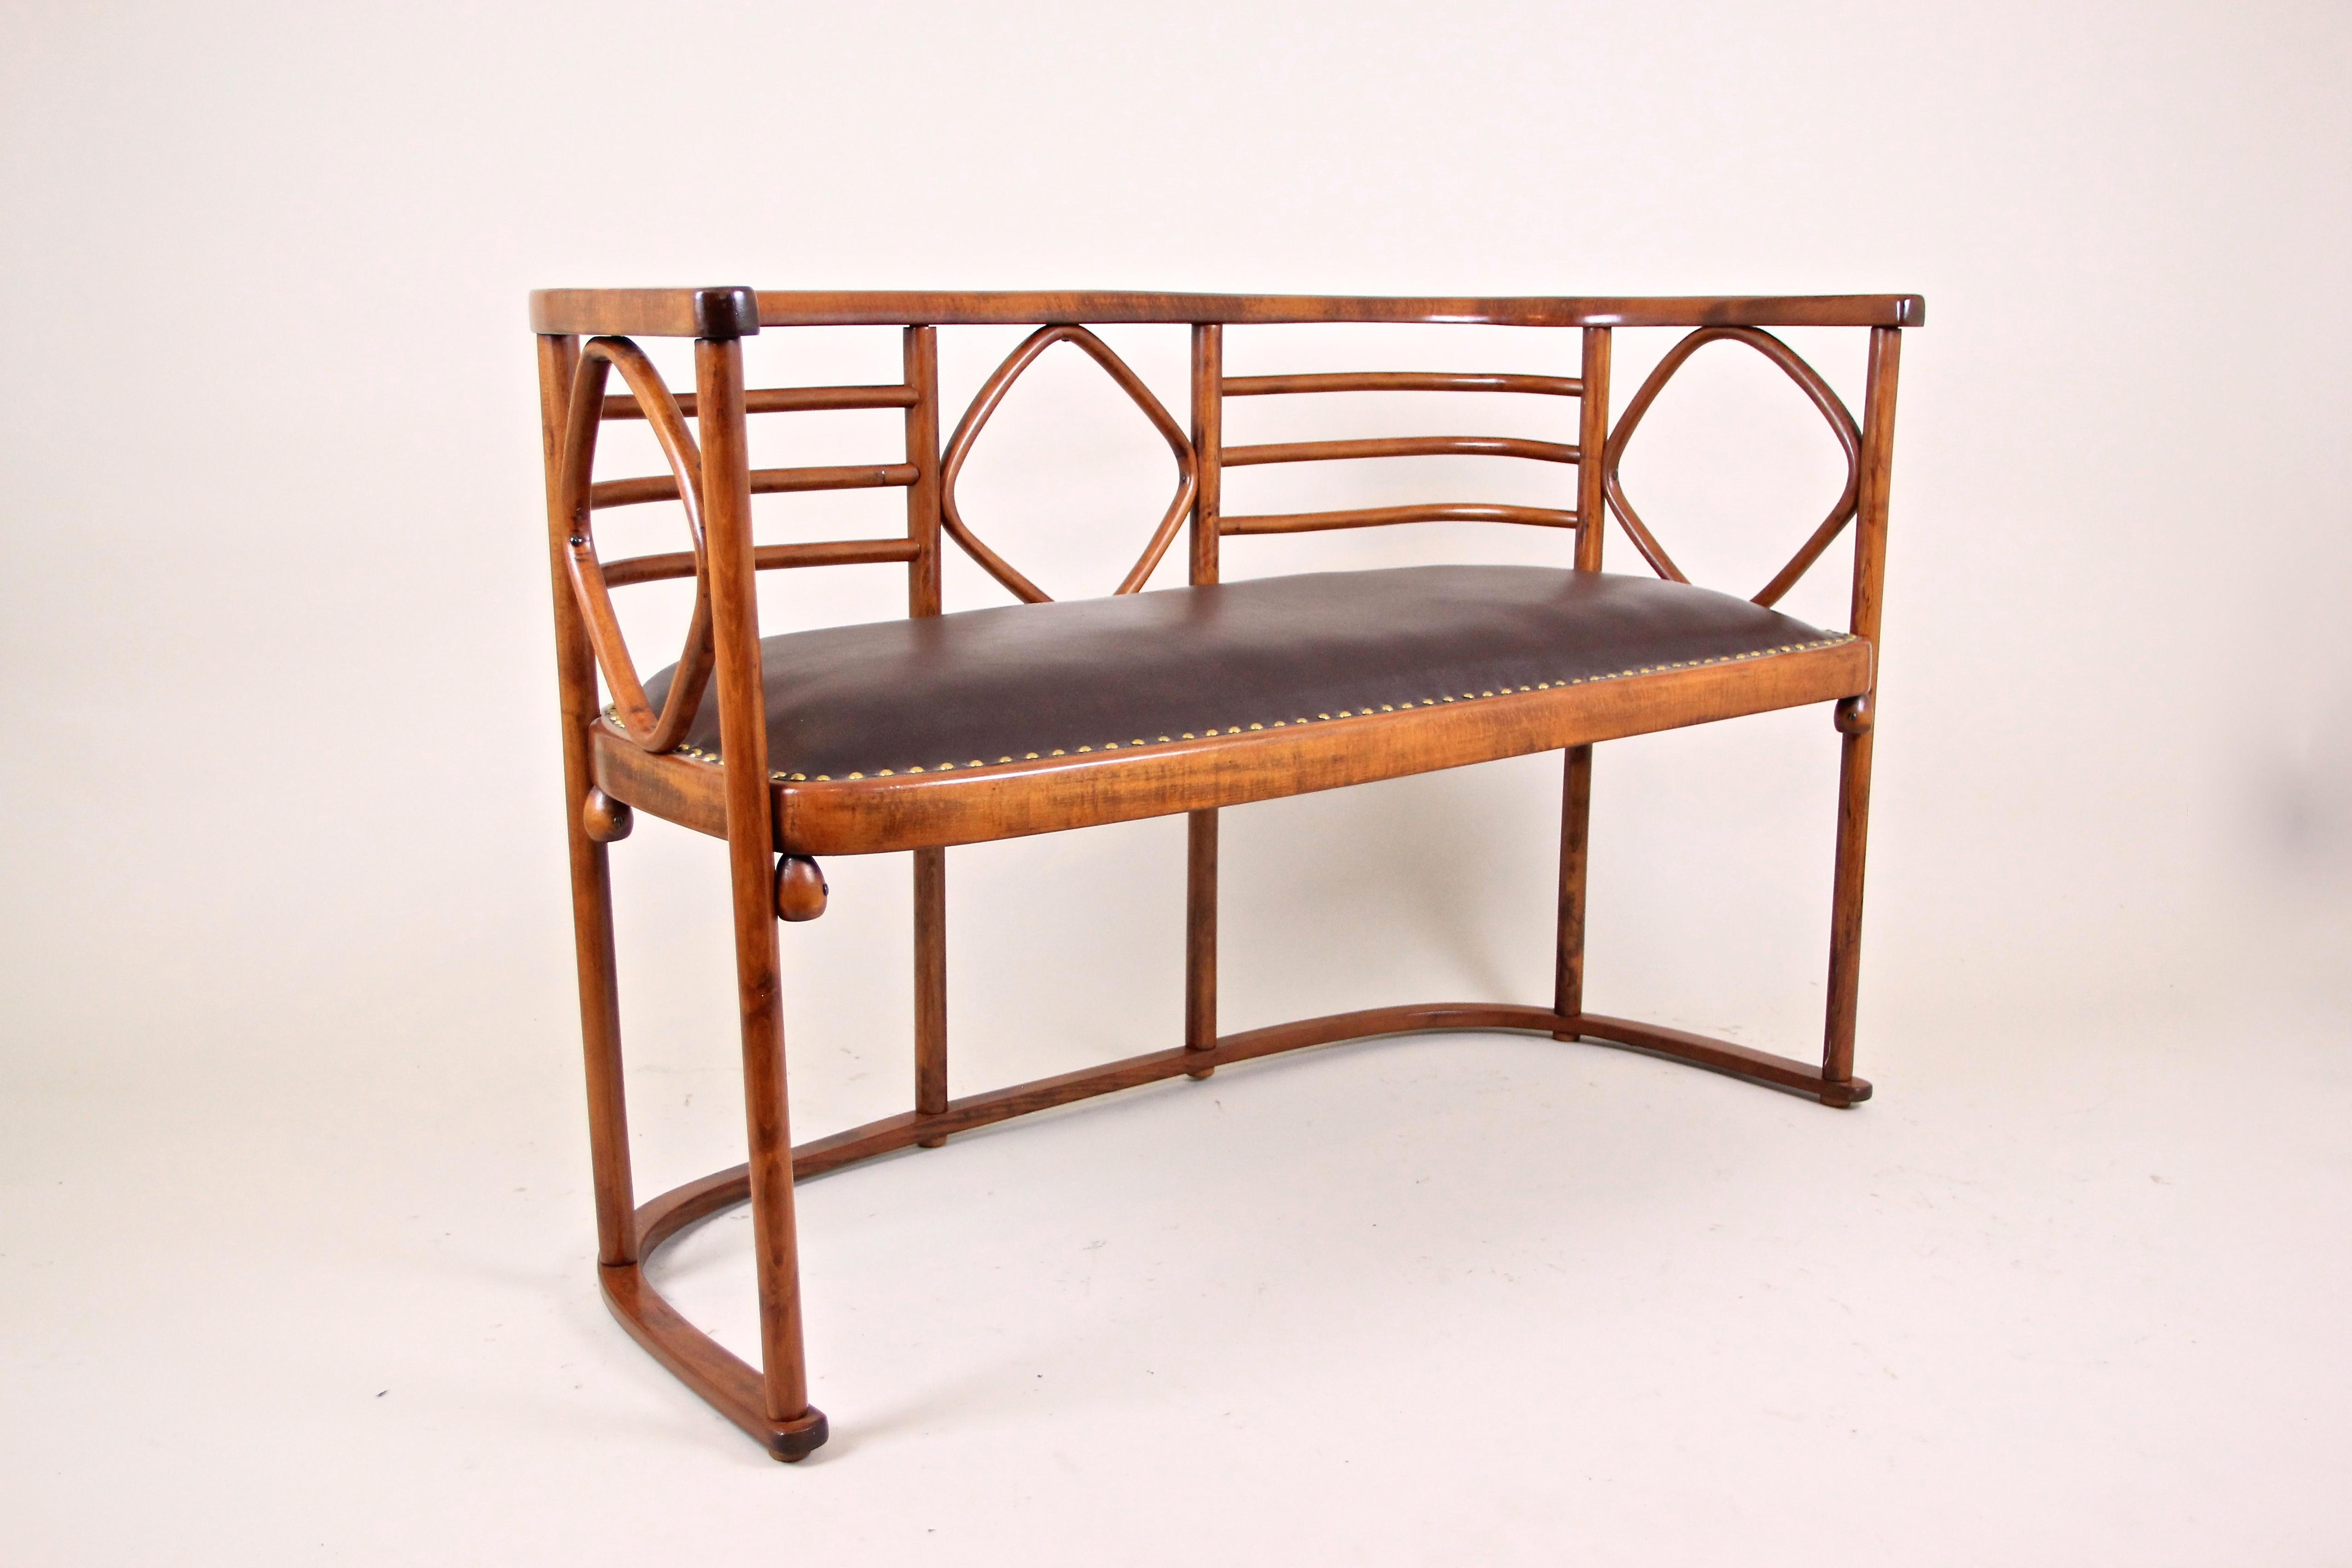 Beautiful bentwood seating set attributed to Thonet, designed by the famous Austrian architect Josef Hoffmann, around 1910. Extraordinary shaped of fine bentwood (=beech was bent under steam and high pressure), the bench and the two armchairs carry